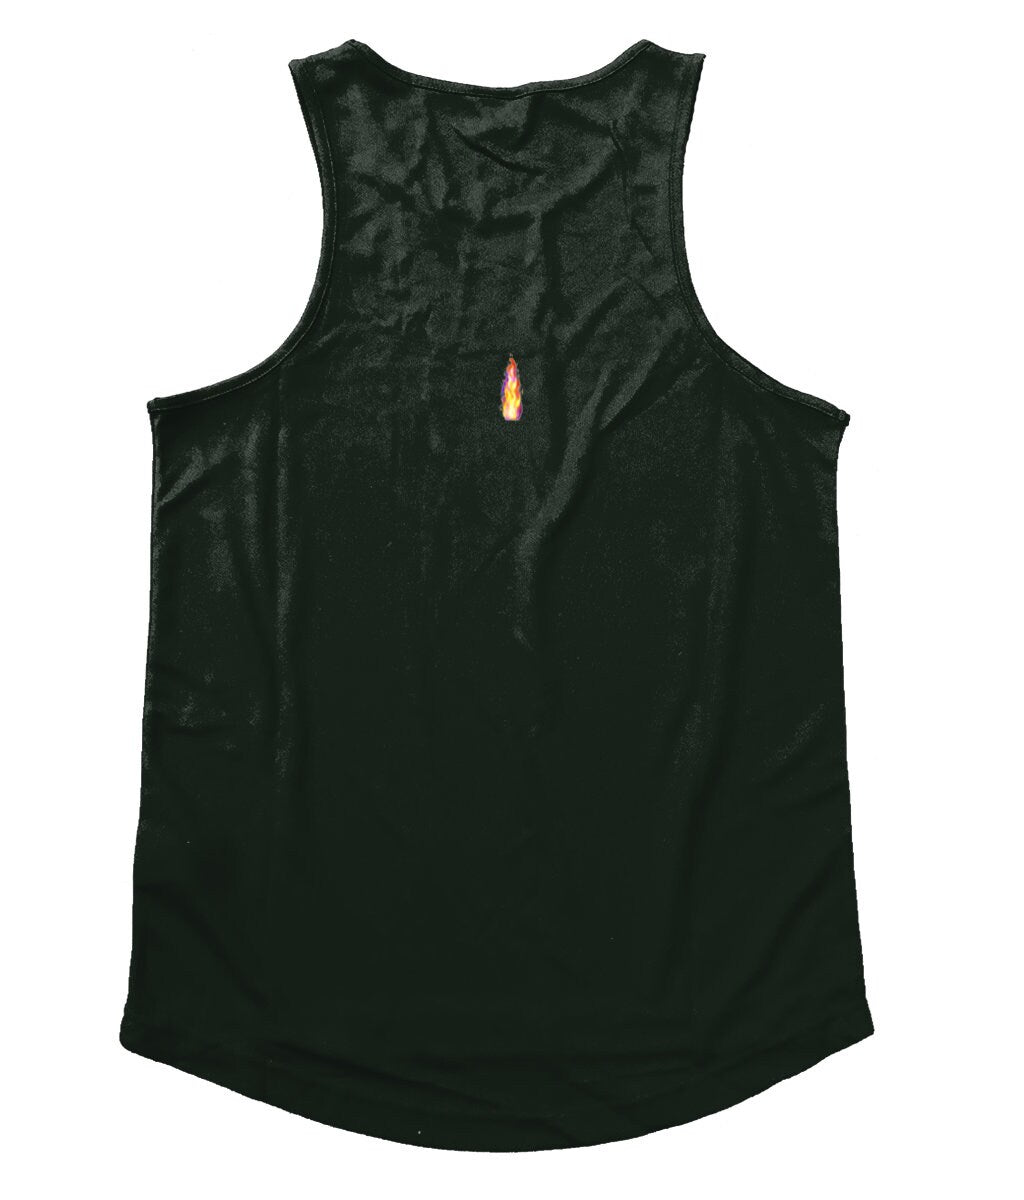 Prepare to be Offended, Cream, Men's Cool Vest